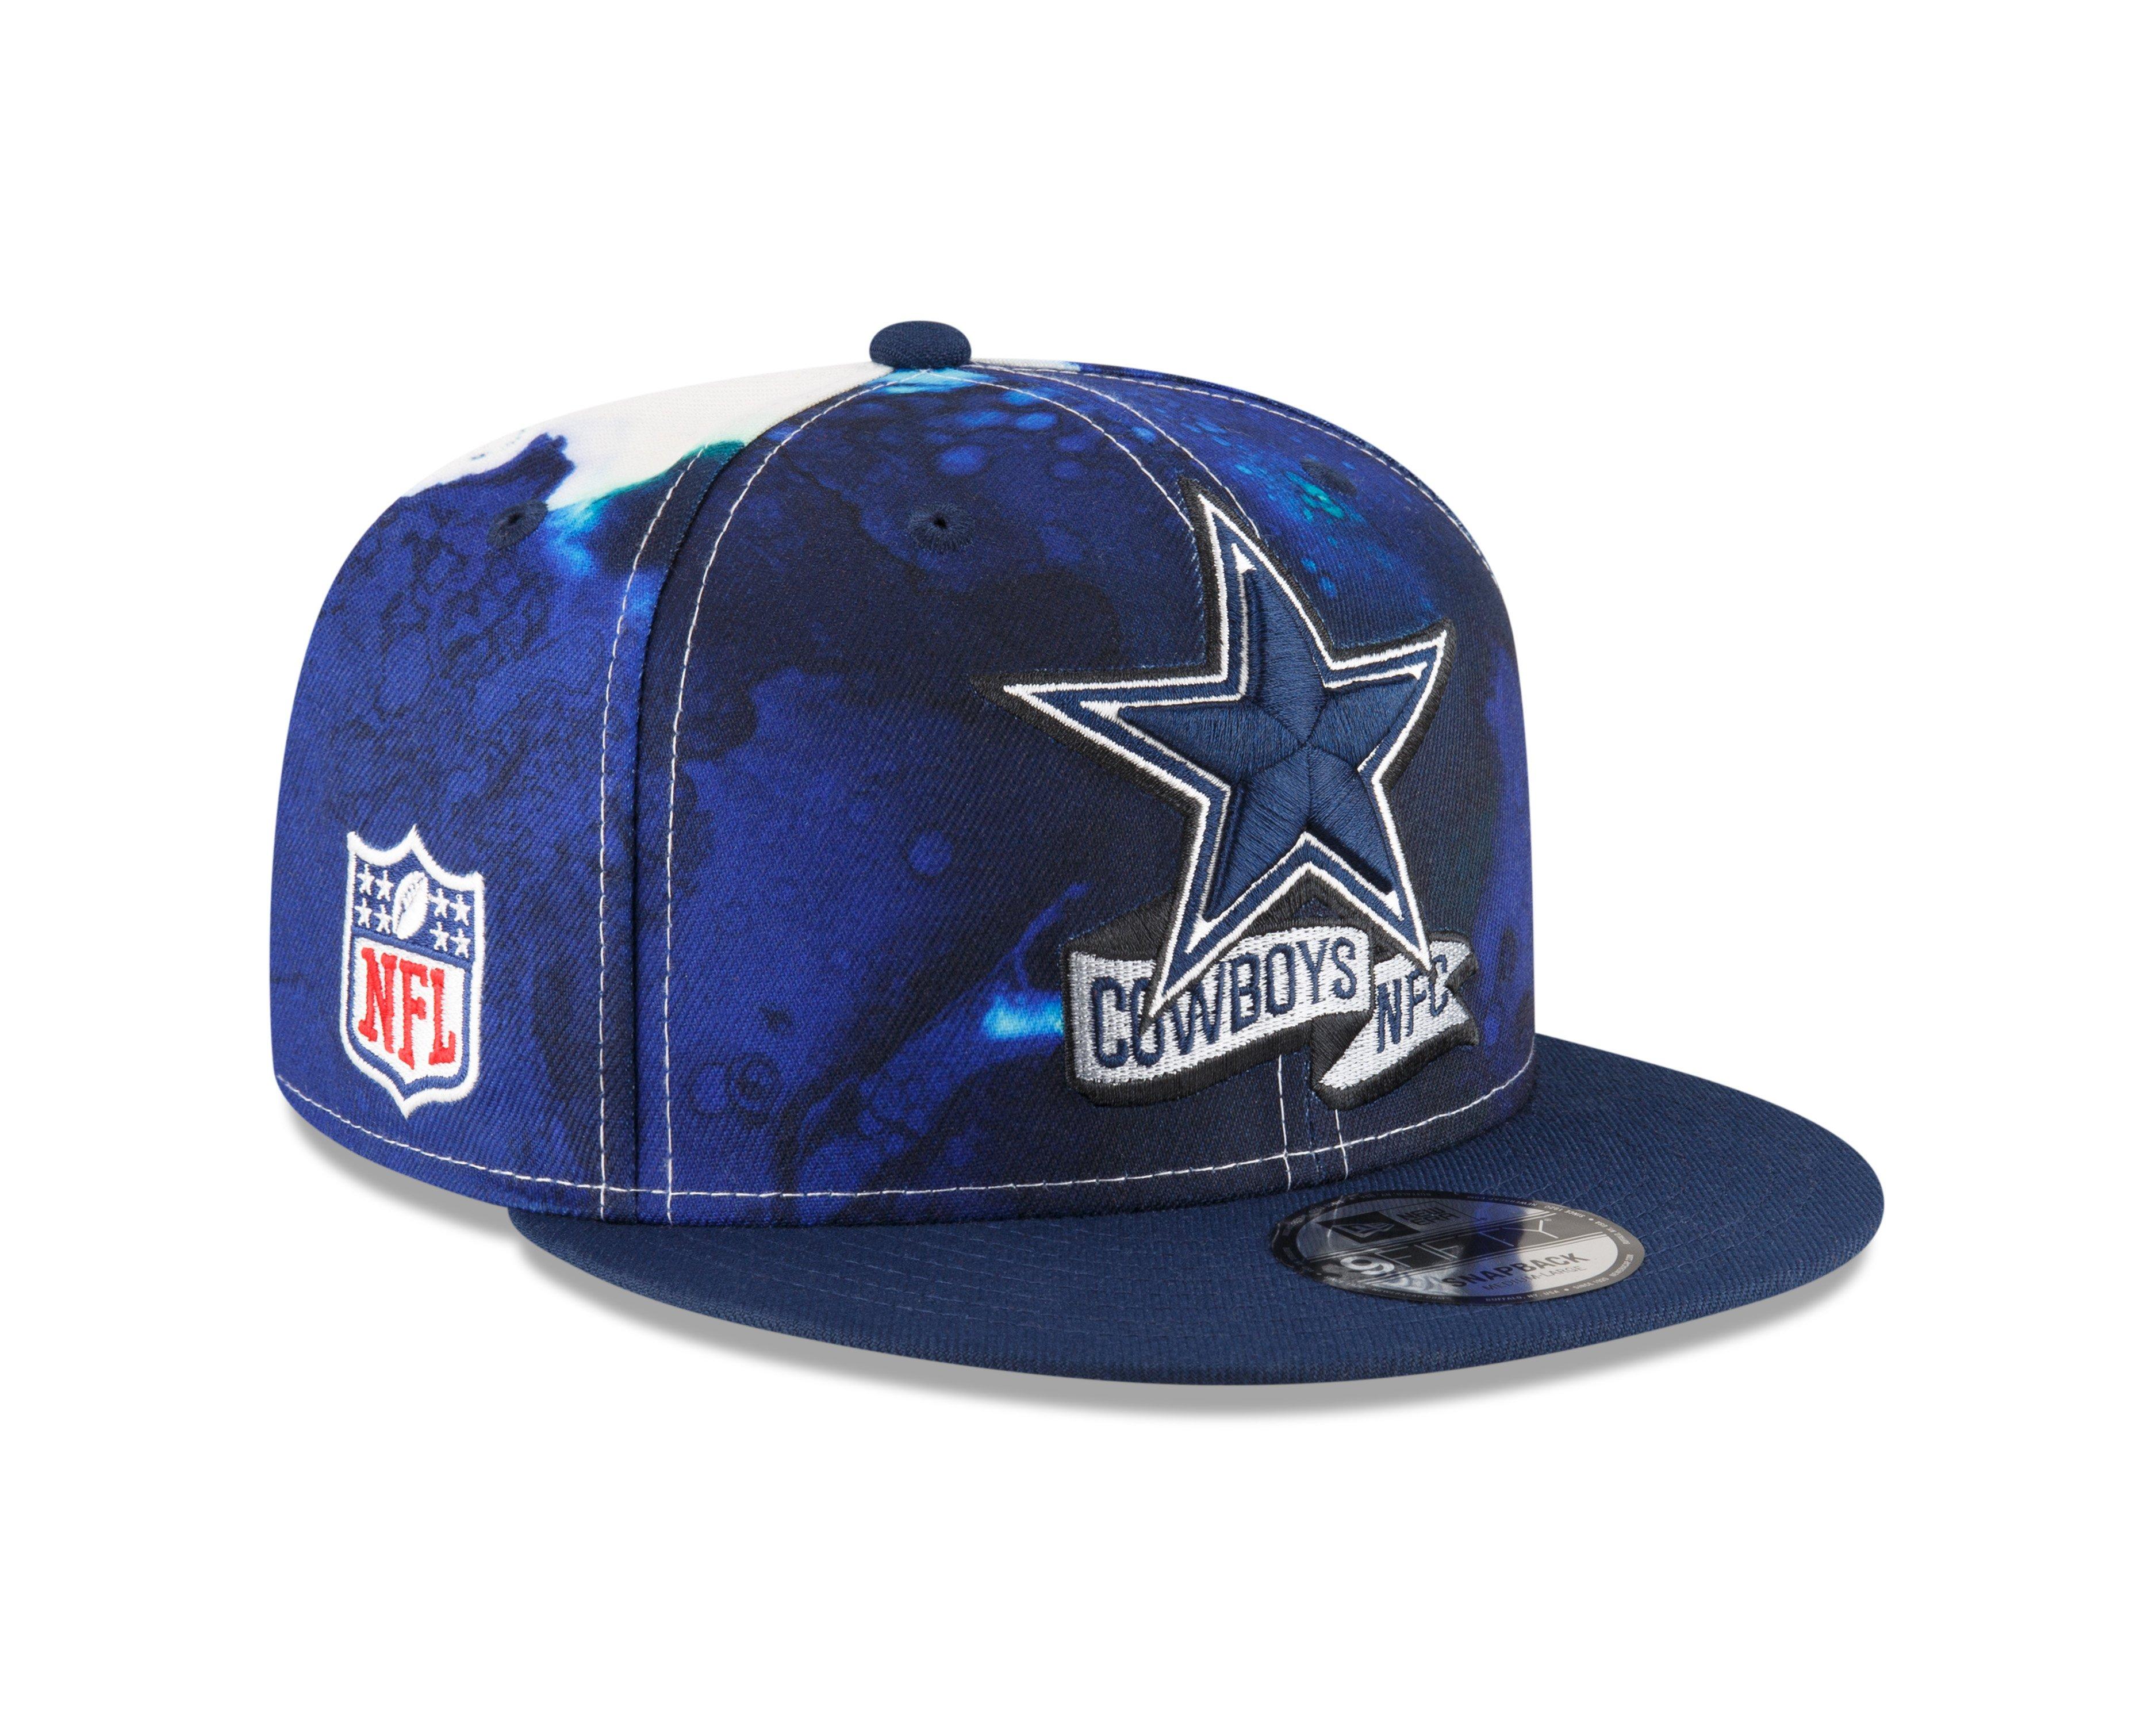 Officially licensed Dallas Cowboys caps and apparel at Levines